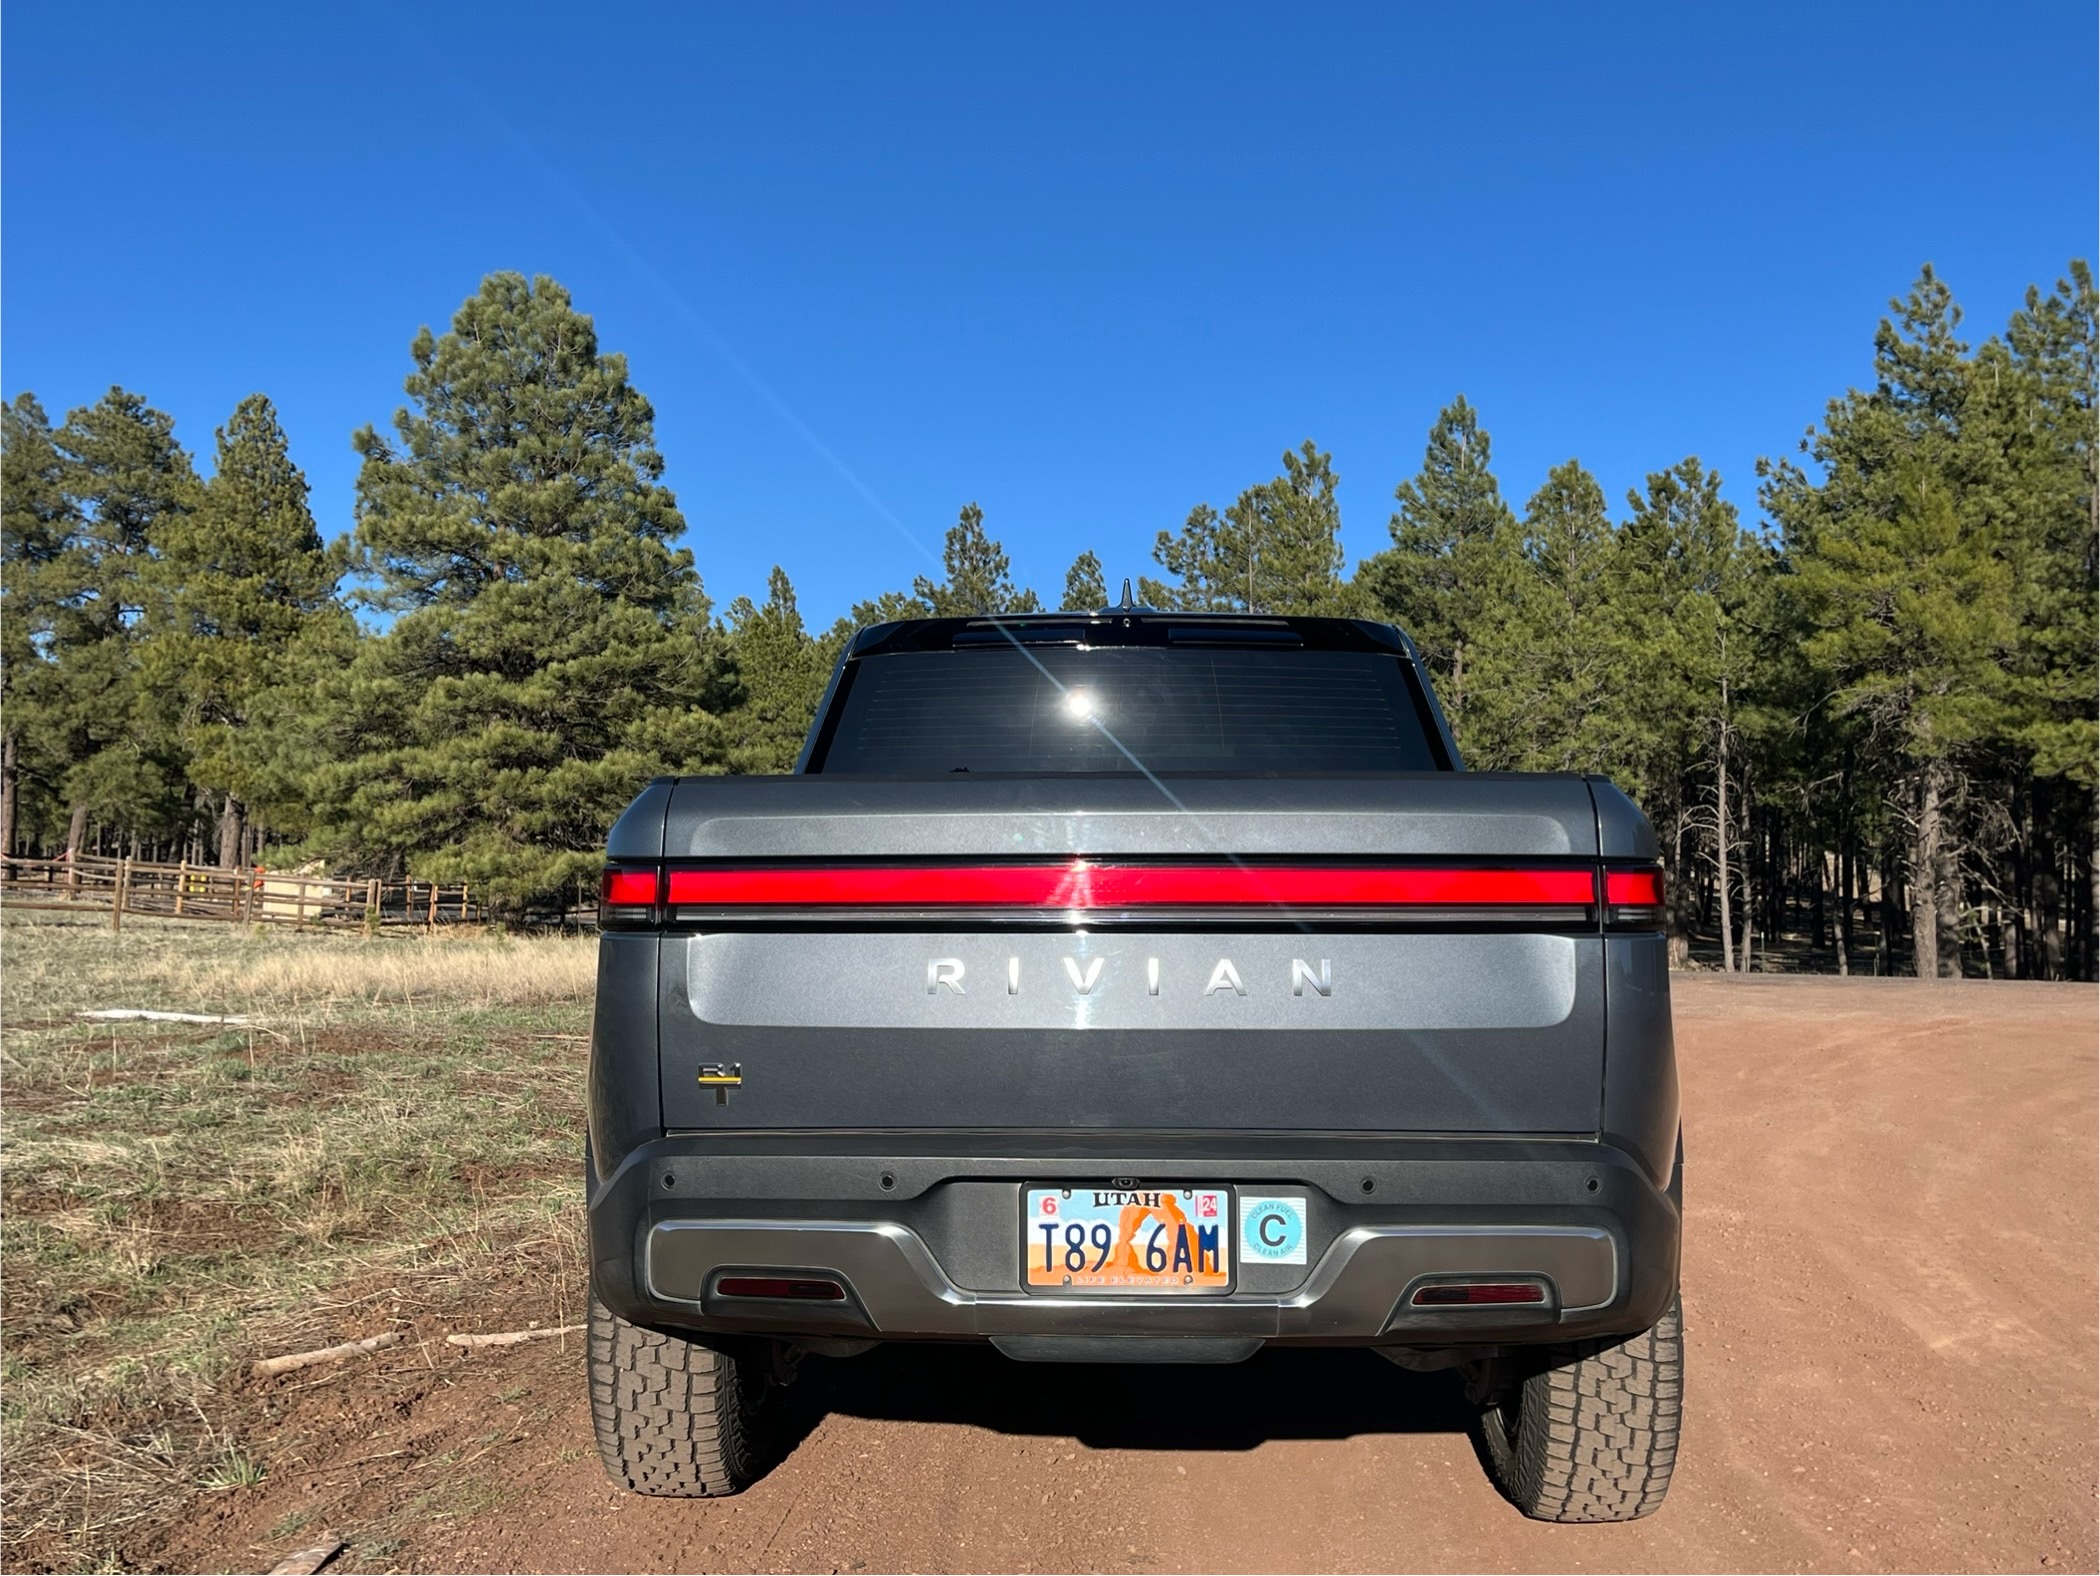 Rivian R1T R1S FOR SALE: 22 R1T LE - El Cap - Quad Motor - Lrg Pack - 20" AT - 39k mi - Off Road Pkg - Lots of Accessories and Aftermarket Upgrades - $60K IMG_6887